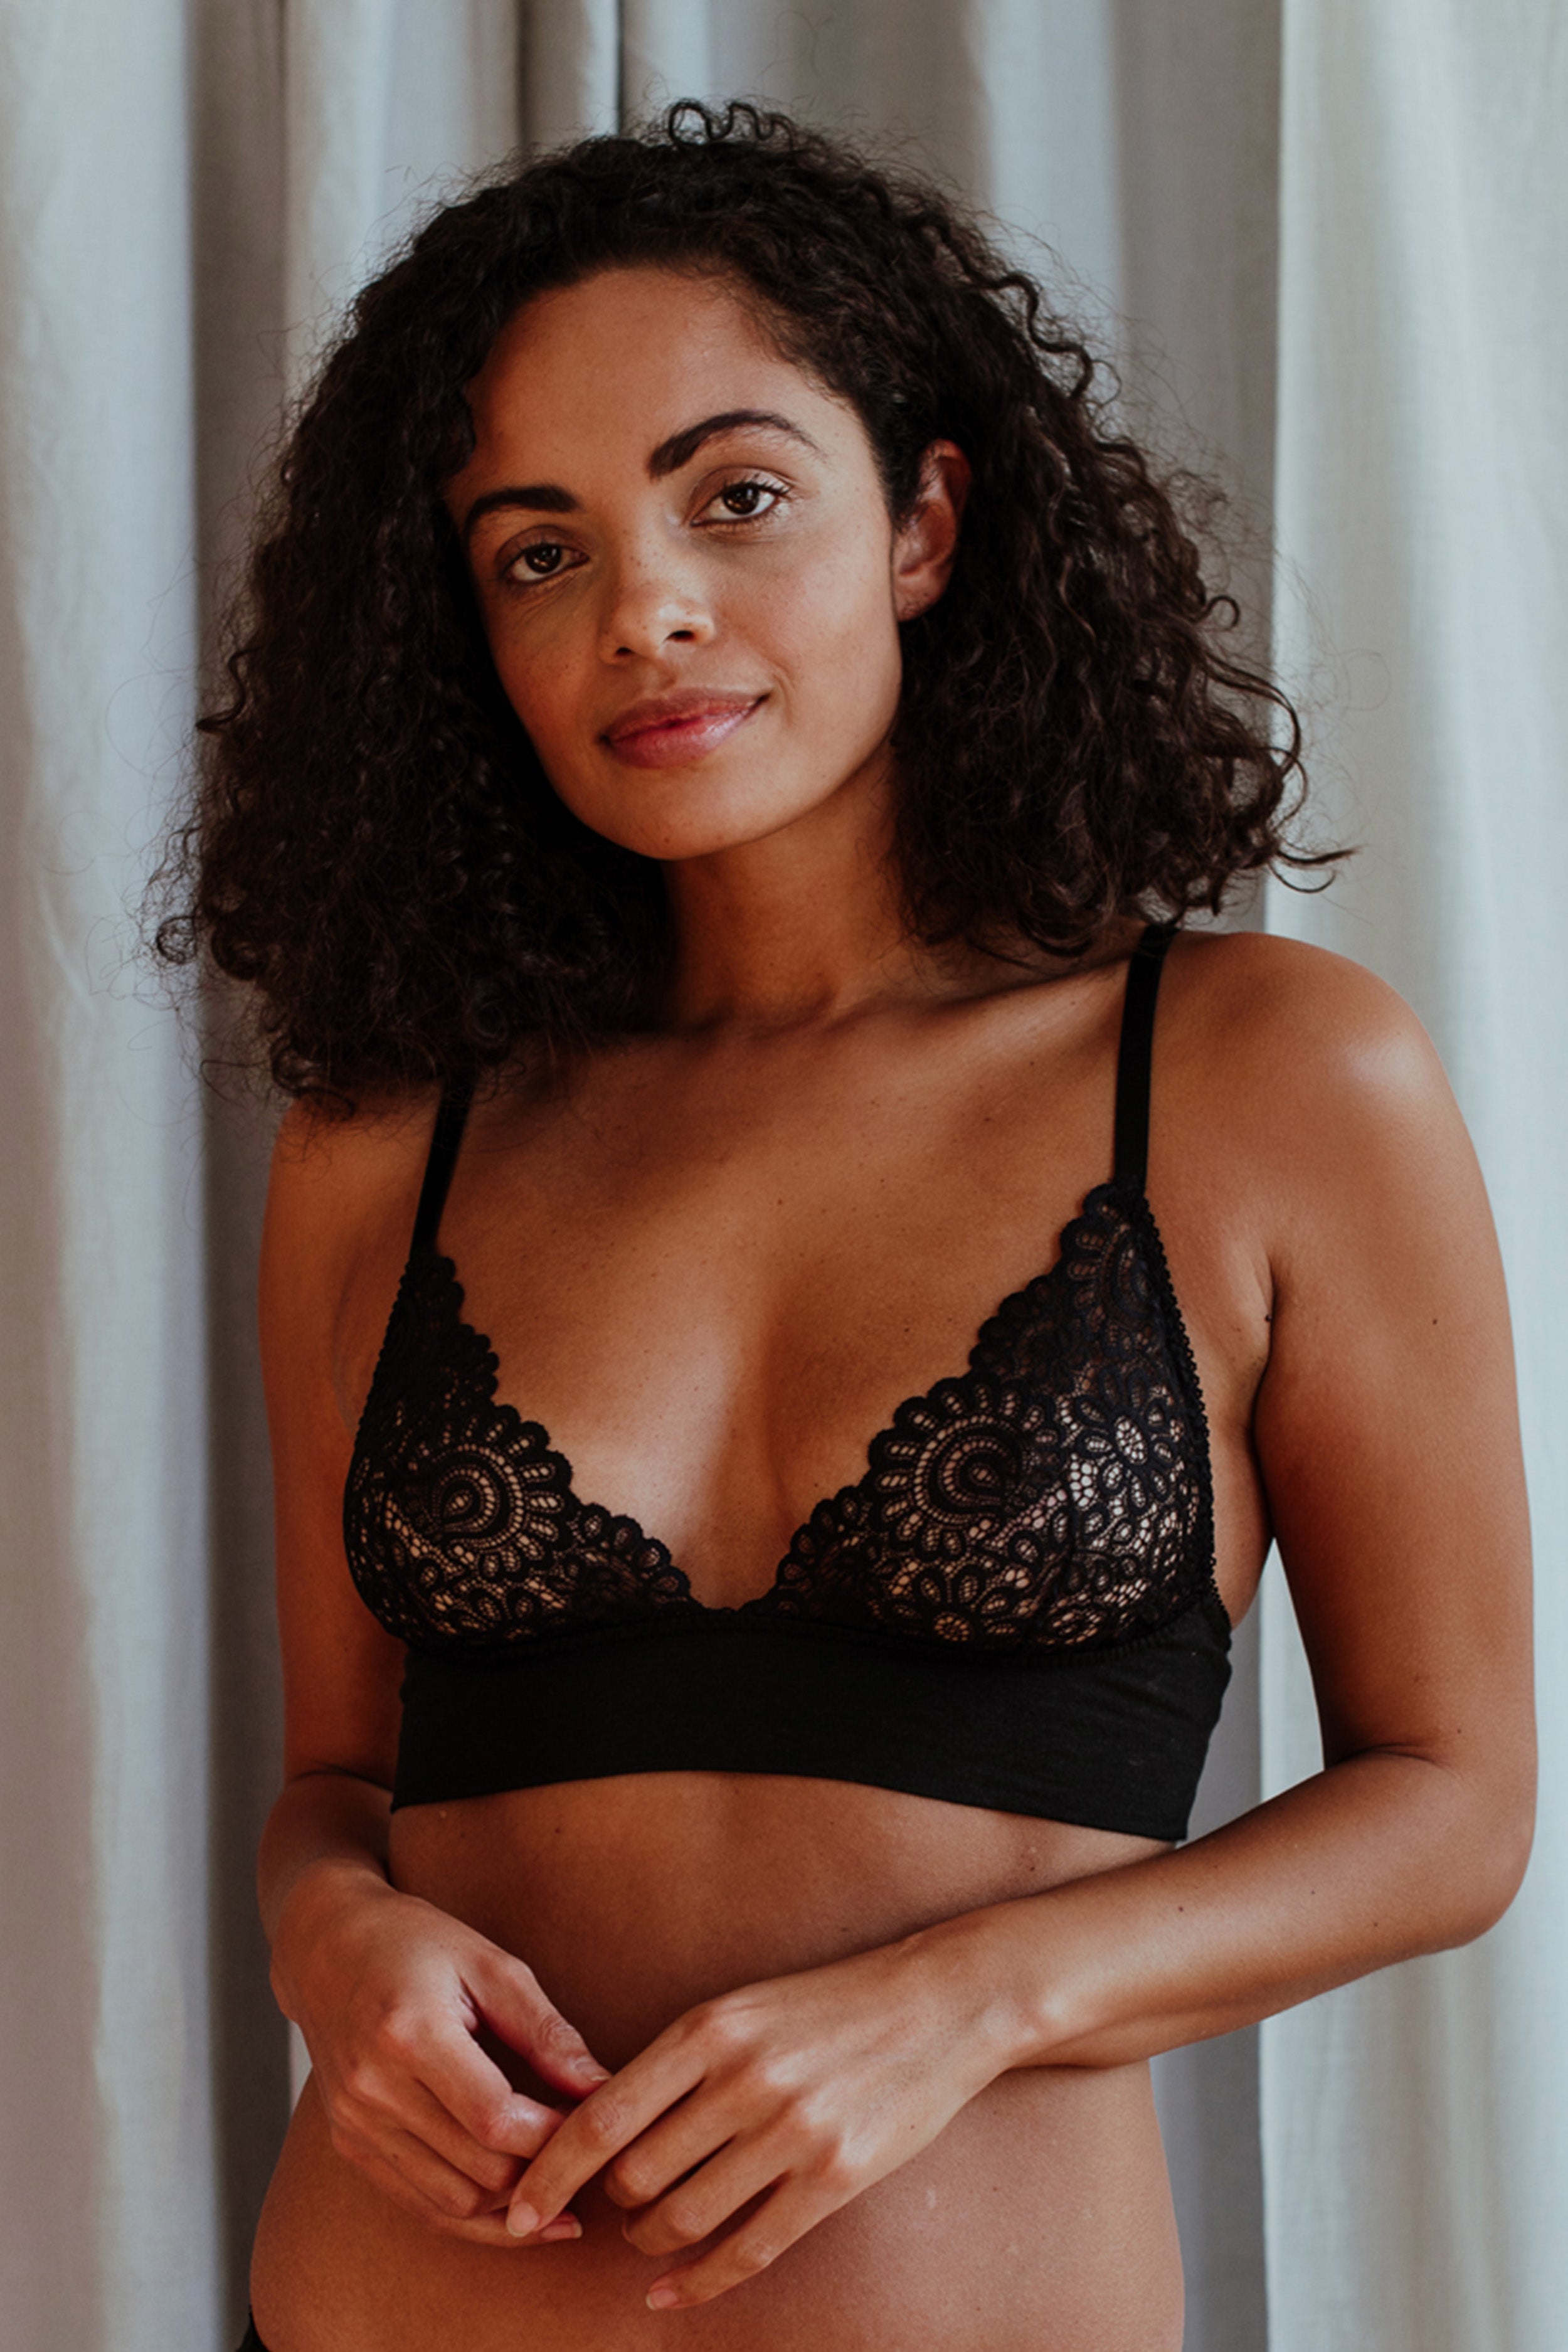 Lace Bralette Top Green Ivy